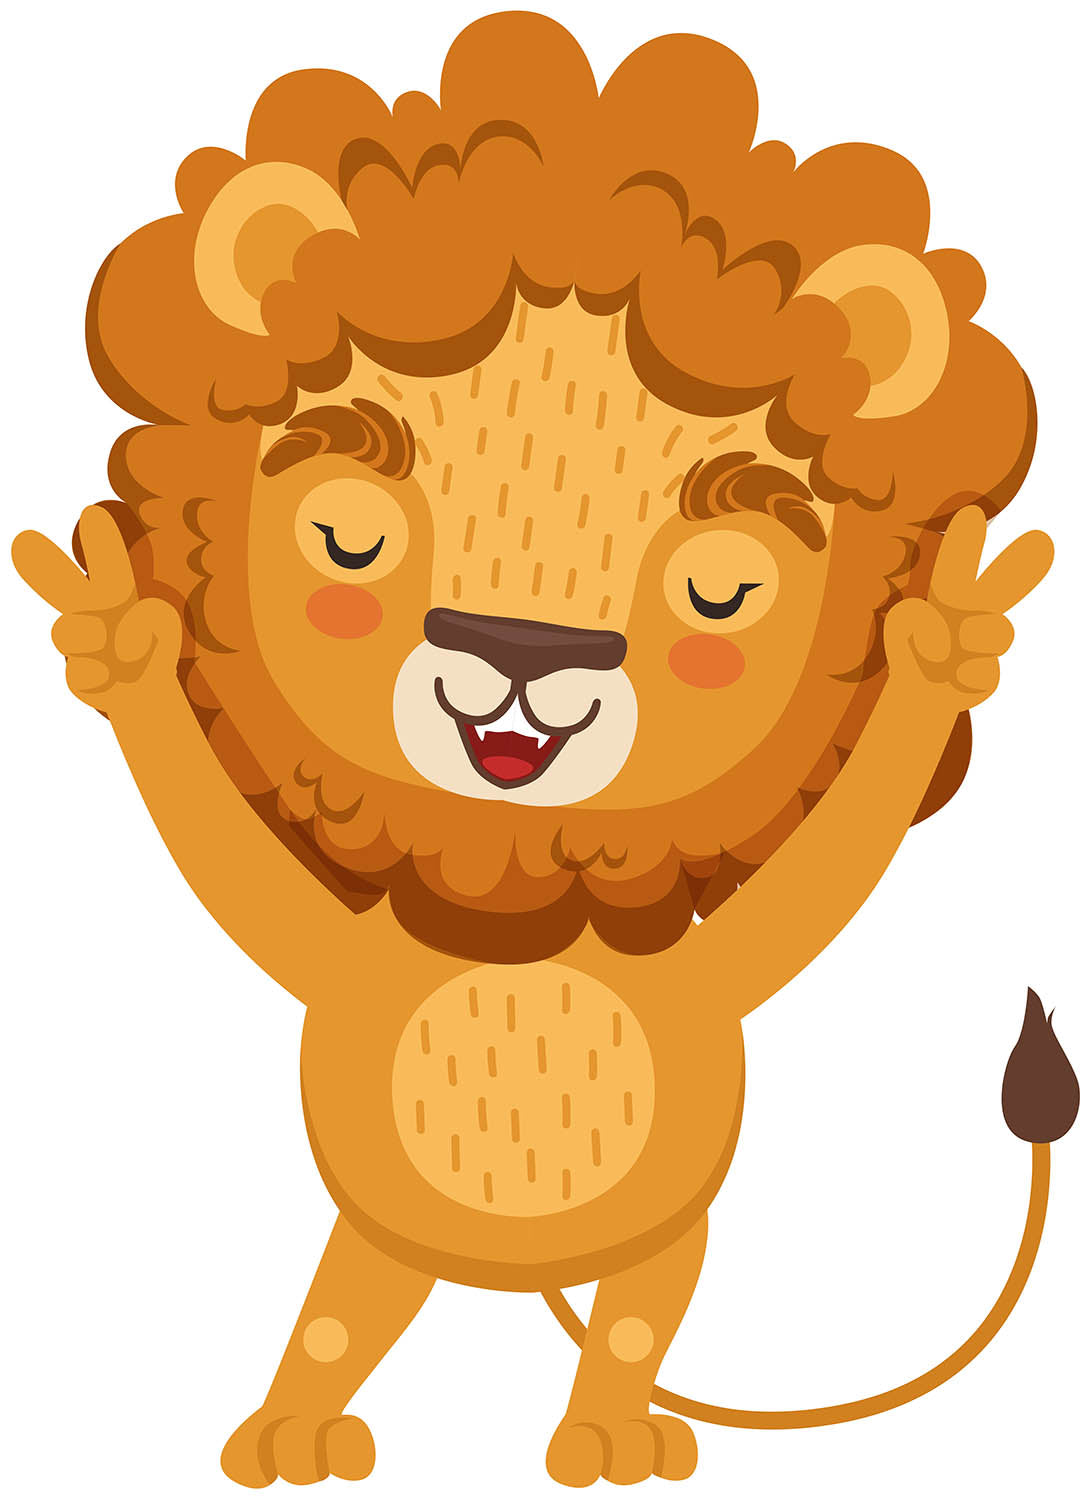 Animated Lion, Arms Up, Wall Decal Sticker, Removable, Soft Fabric Decal